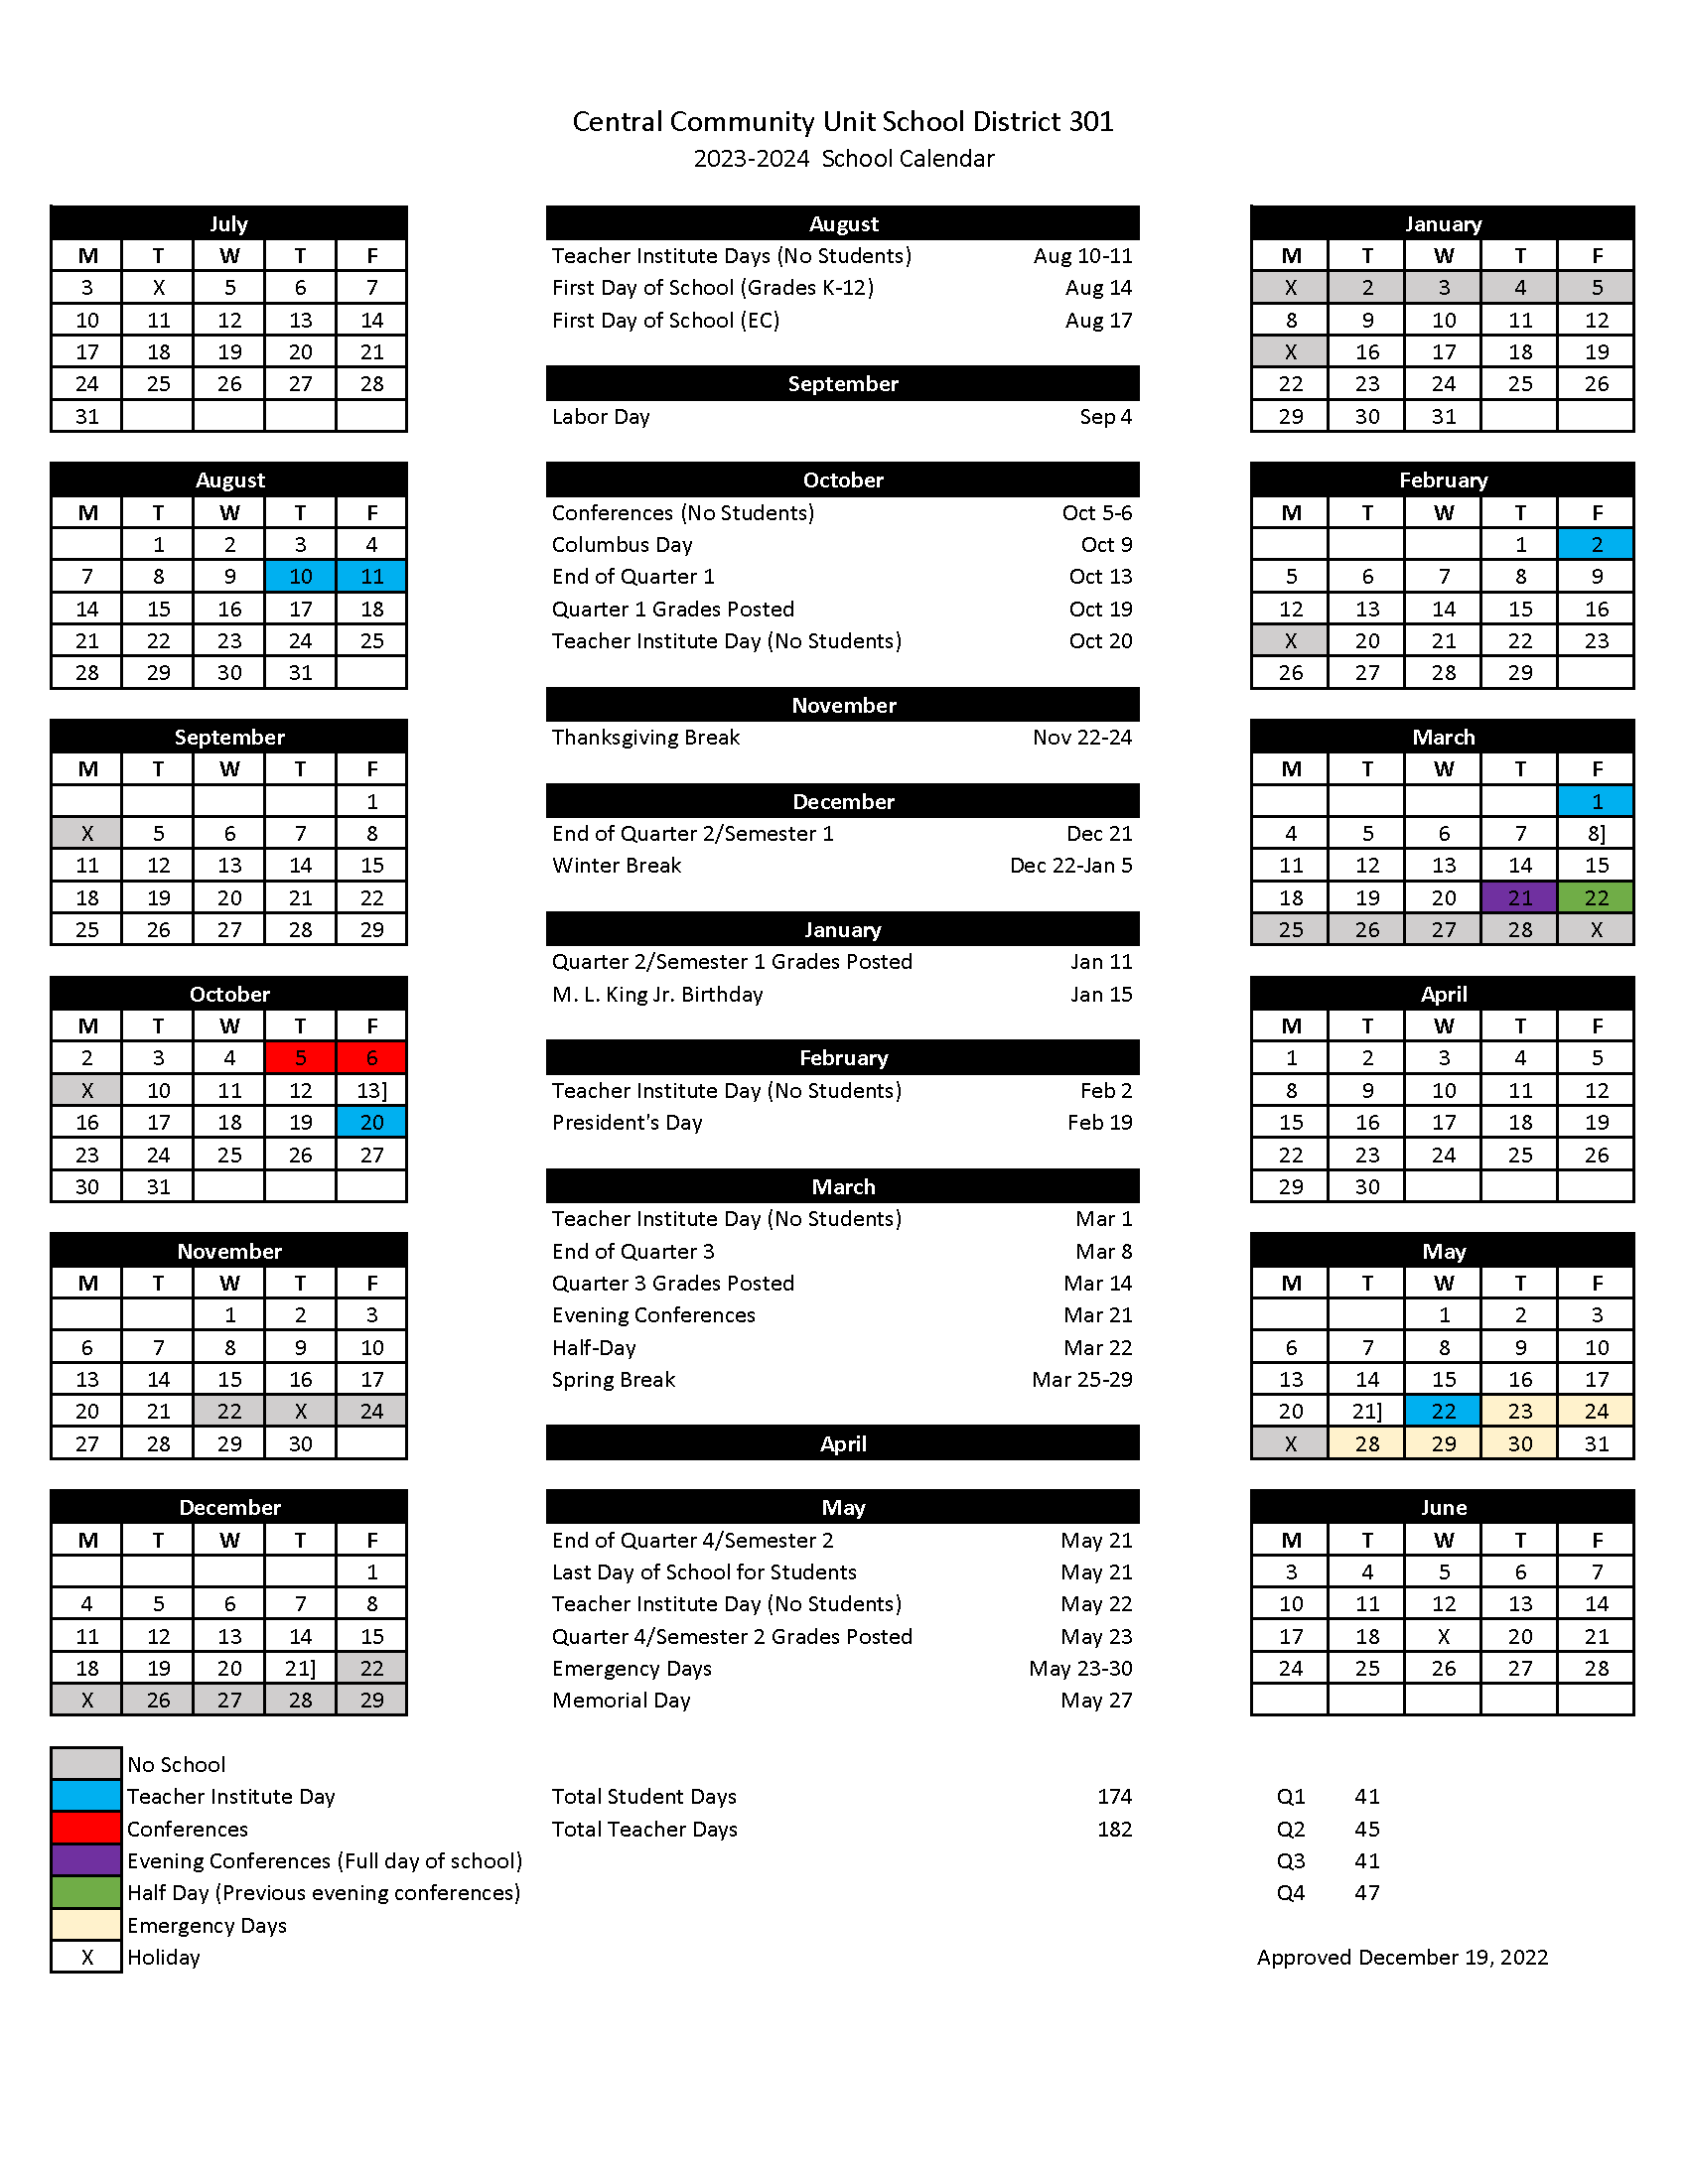 CENTRAL 301 SCHOOL CALENDAR APPROVED FOR 2023-24 - Central School